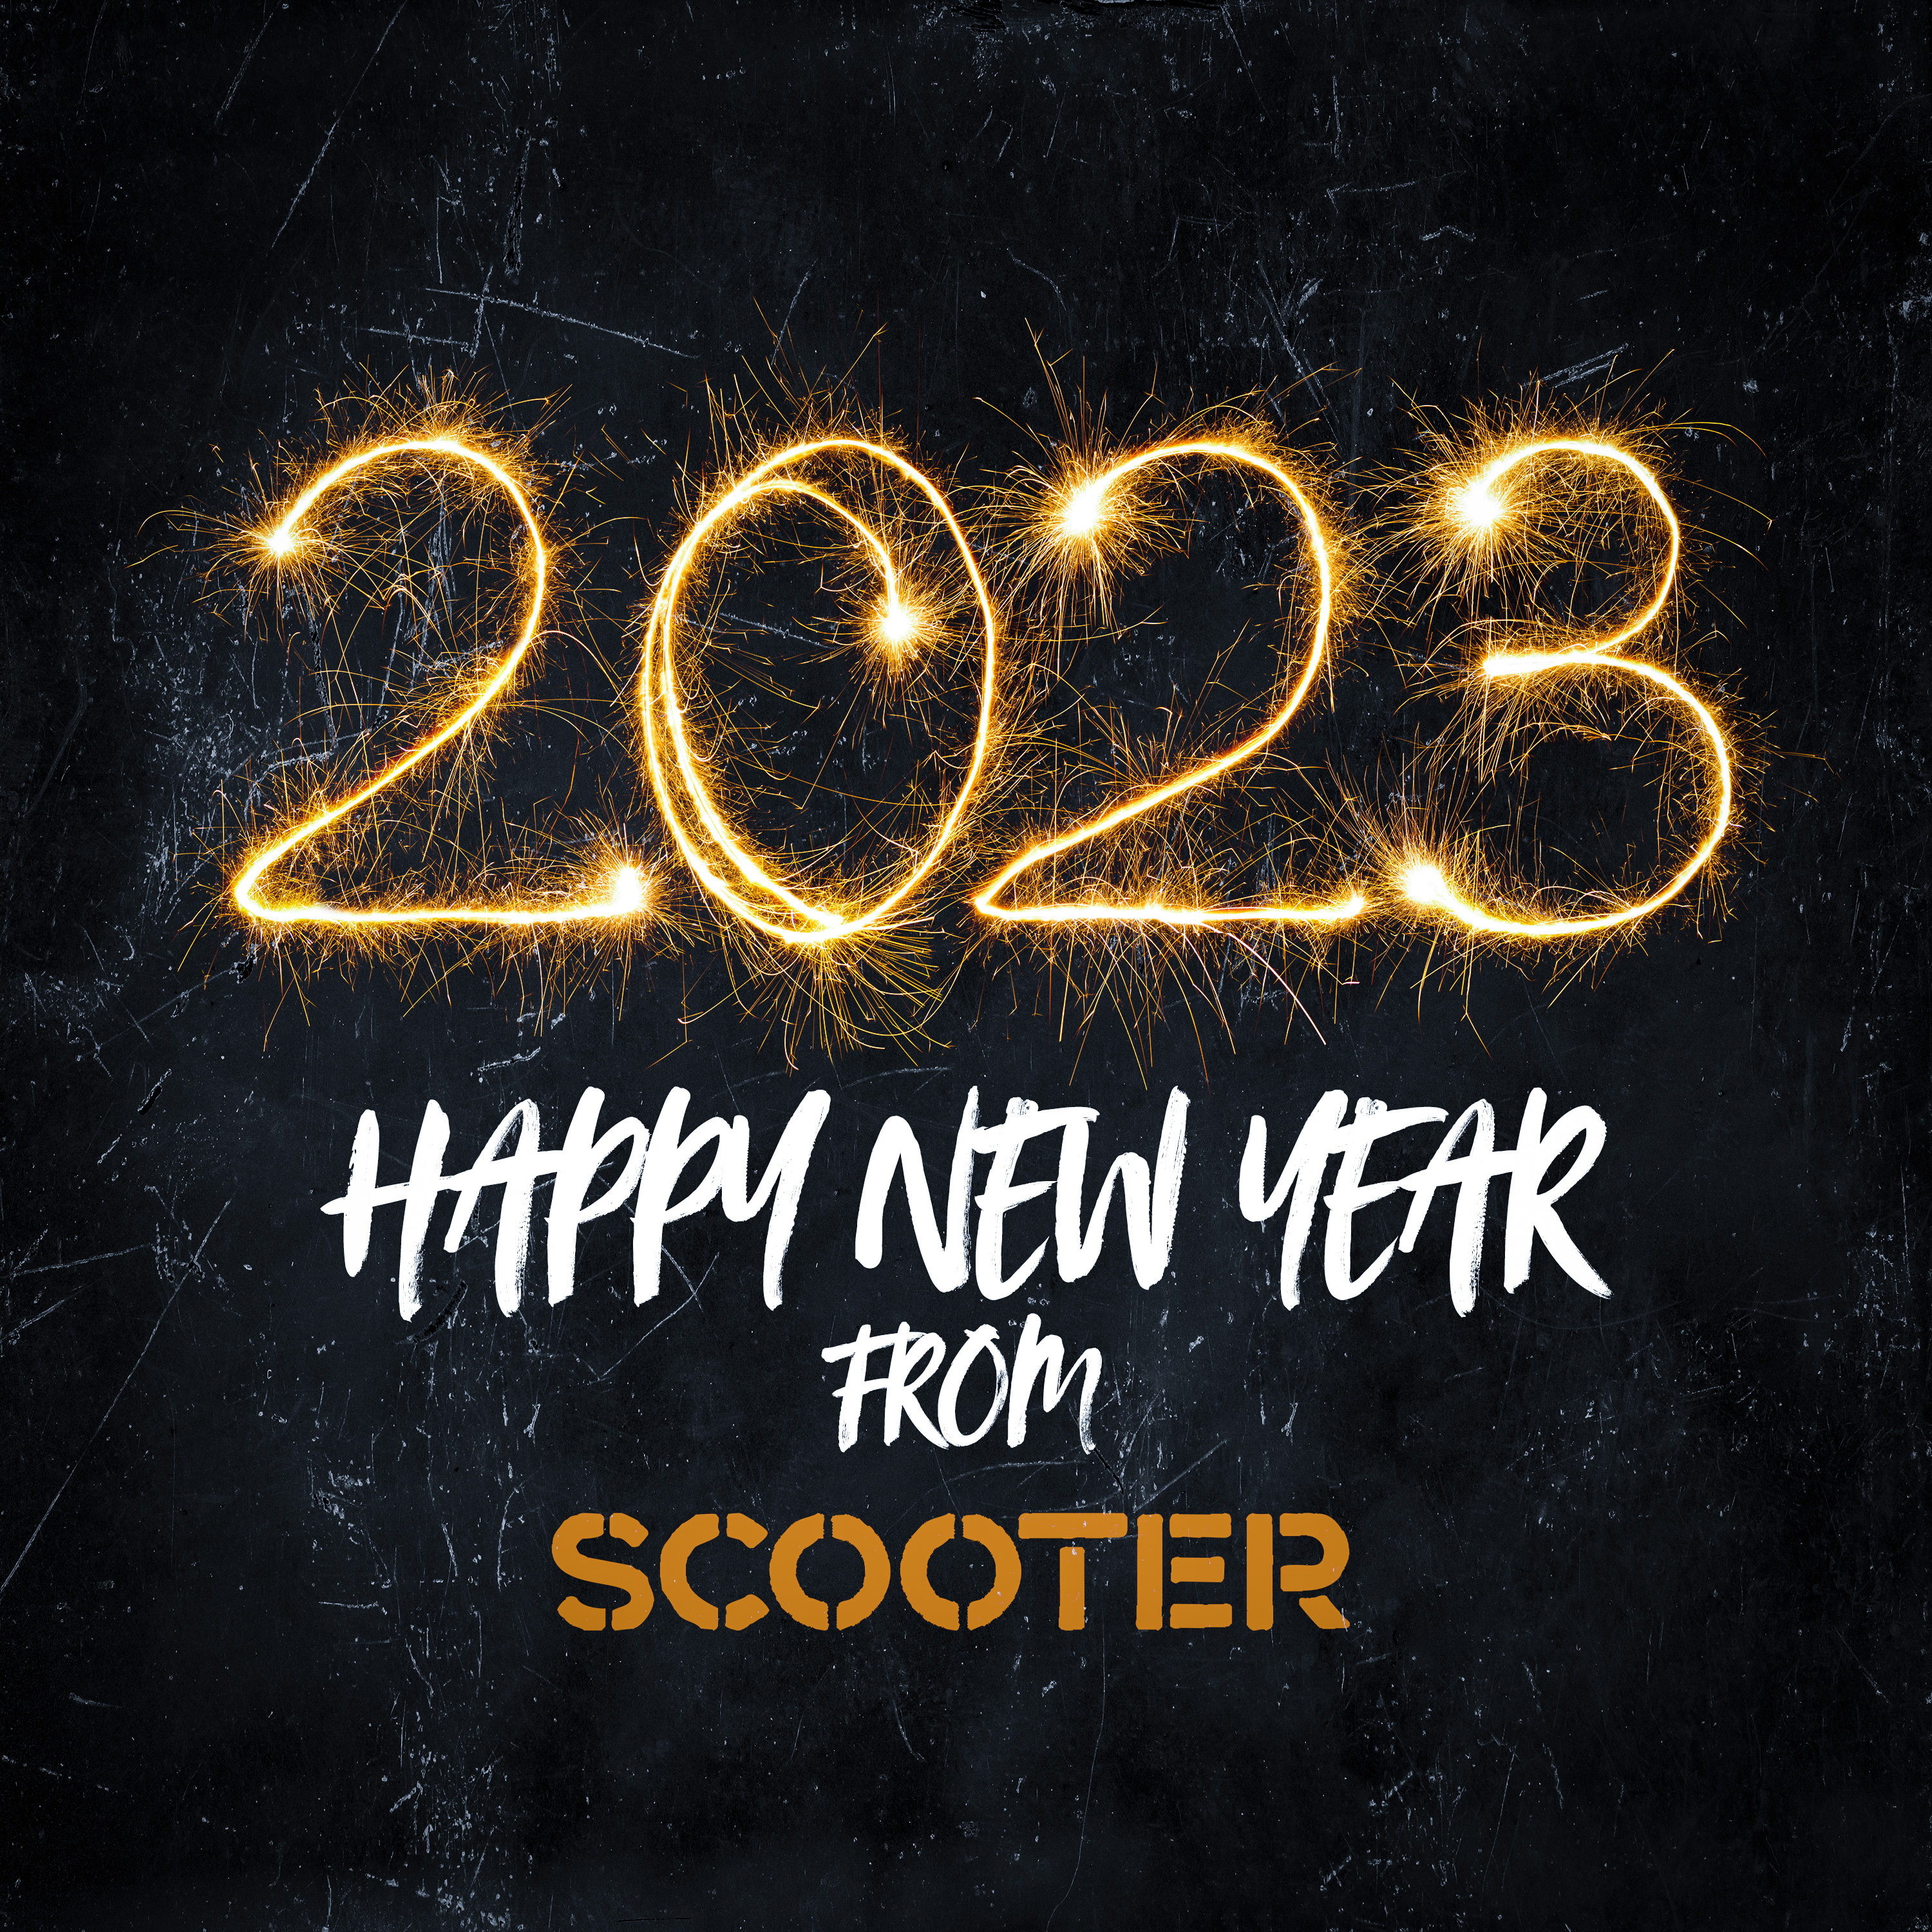 Scooter on Twitter: "Happy new year to of you, Posse! Watch out for the 7th chapter #newyear #scootertechno https://t.co/yMMudoed2u" / Twitter